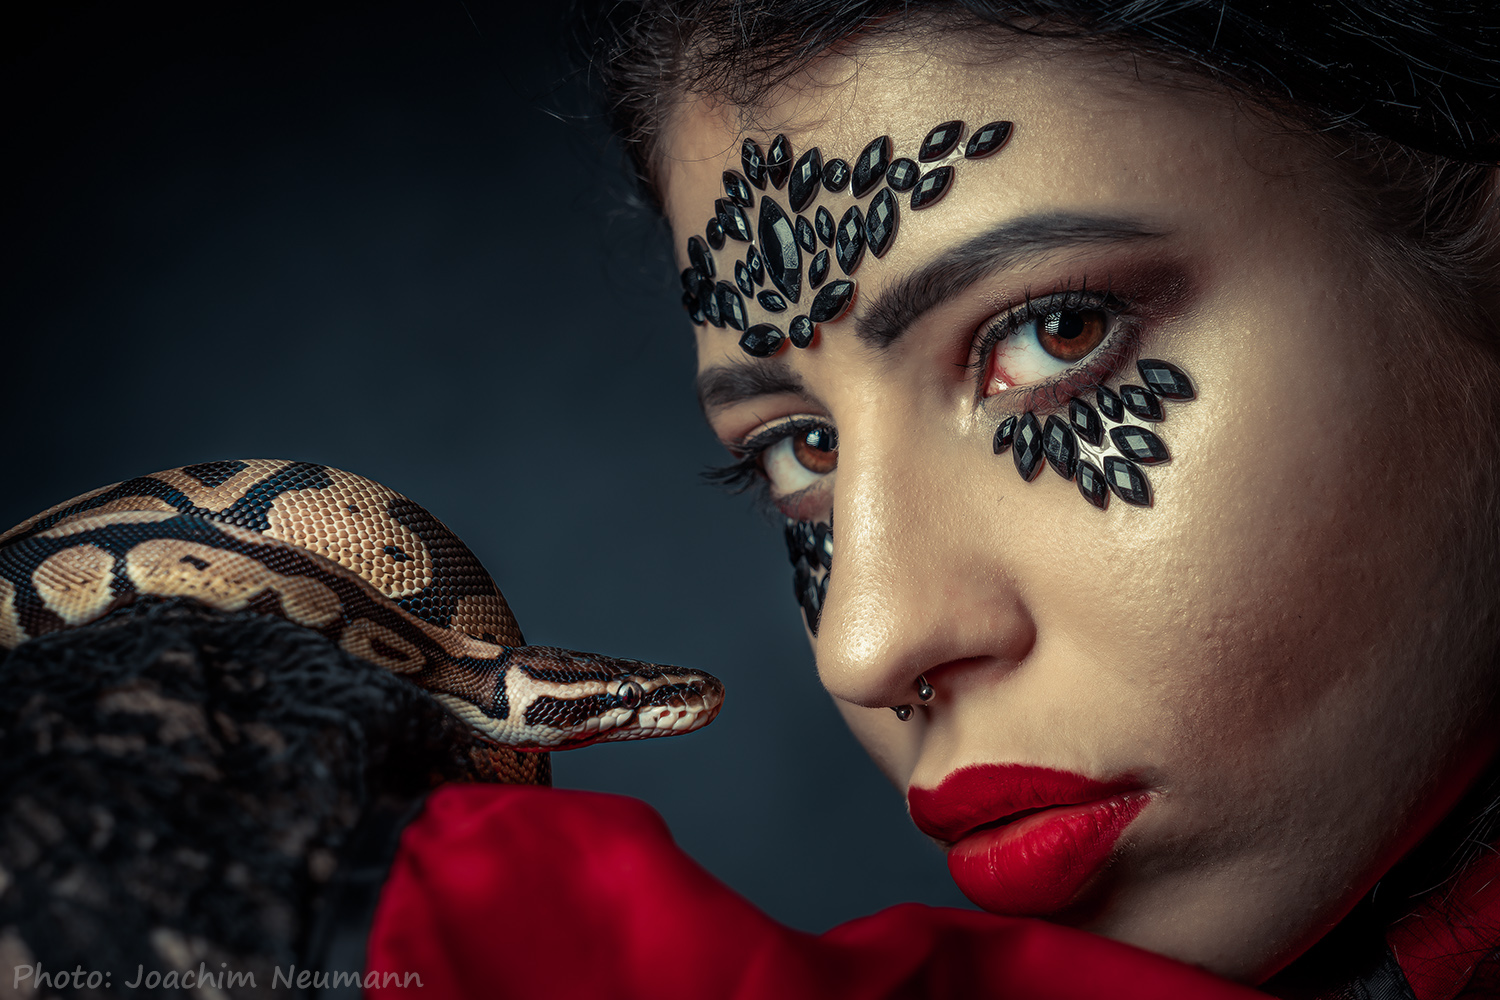 THE GIRL AND HER SNAKE